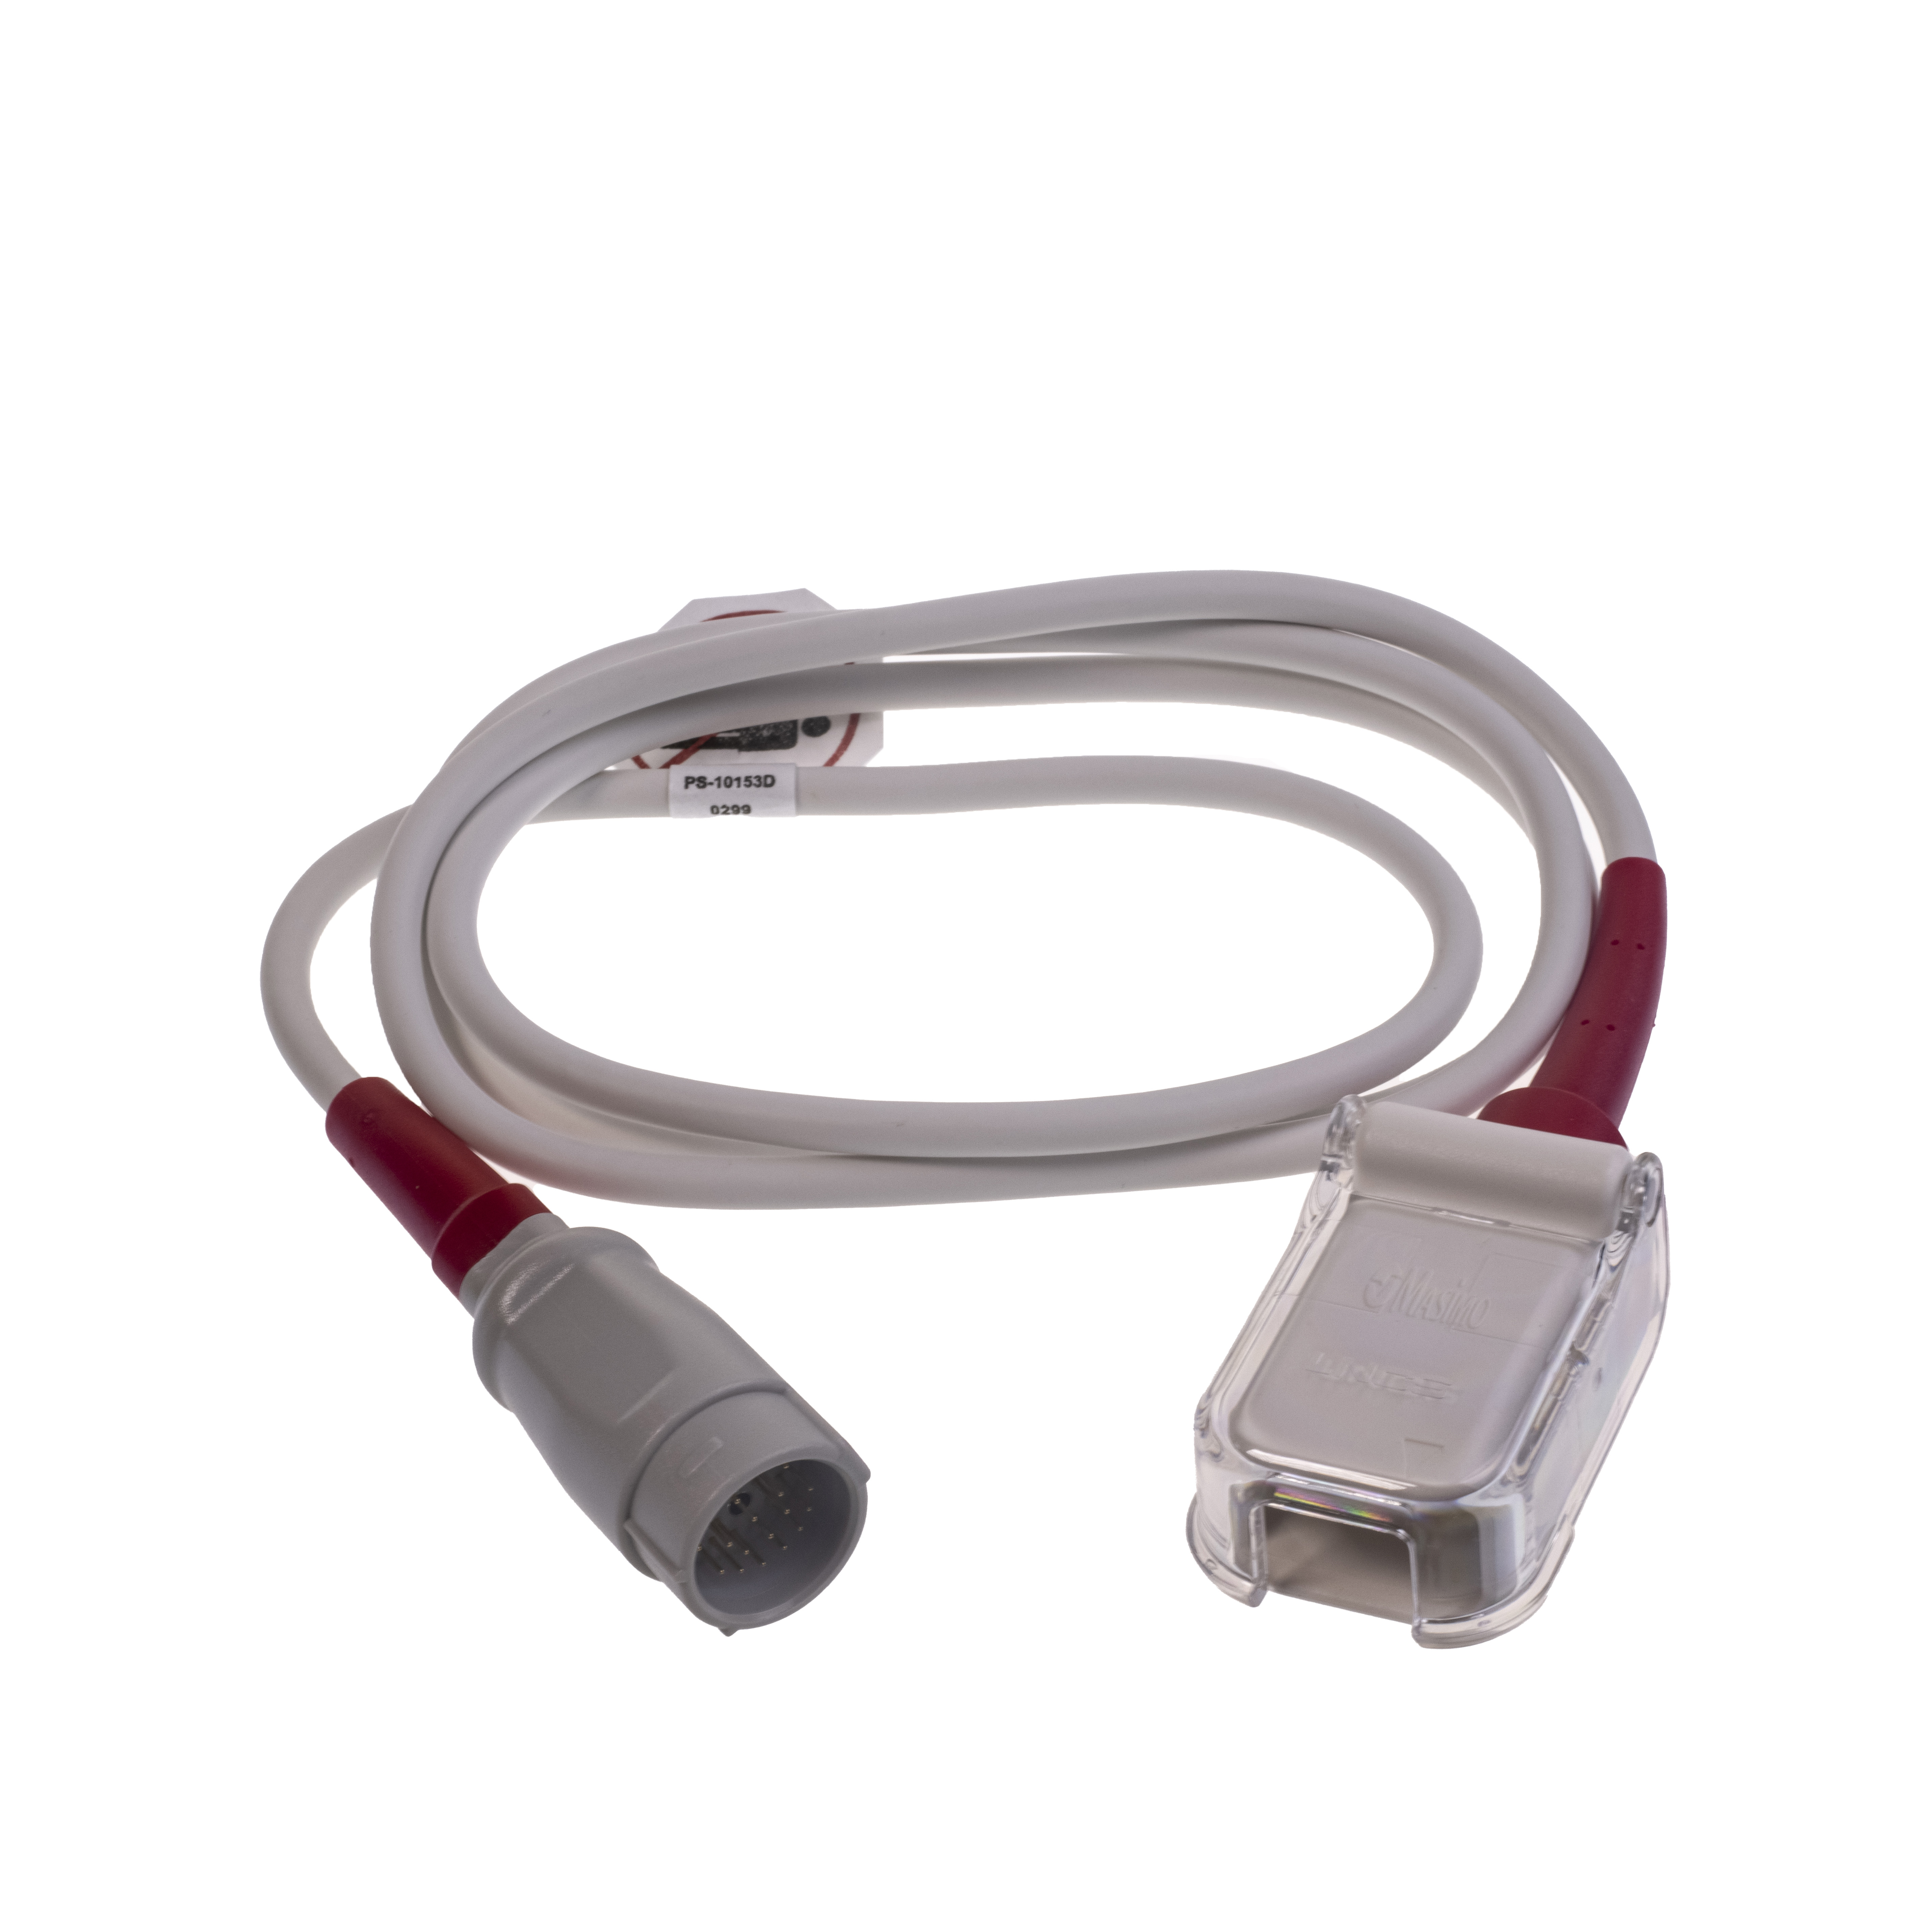 Masimo LNCS Cable, LNC-4, 4-Foot ( Requires 2103987-001 or -002 )